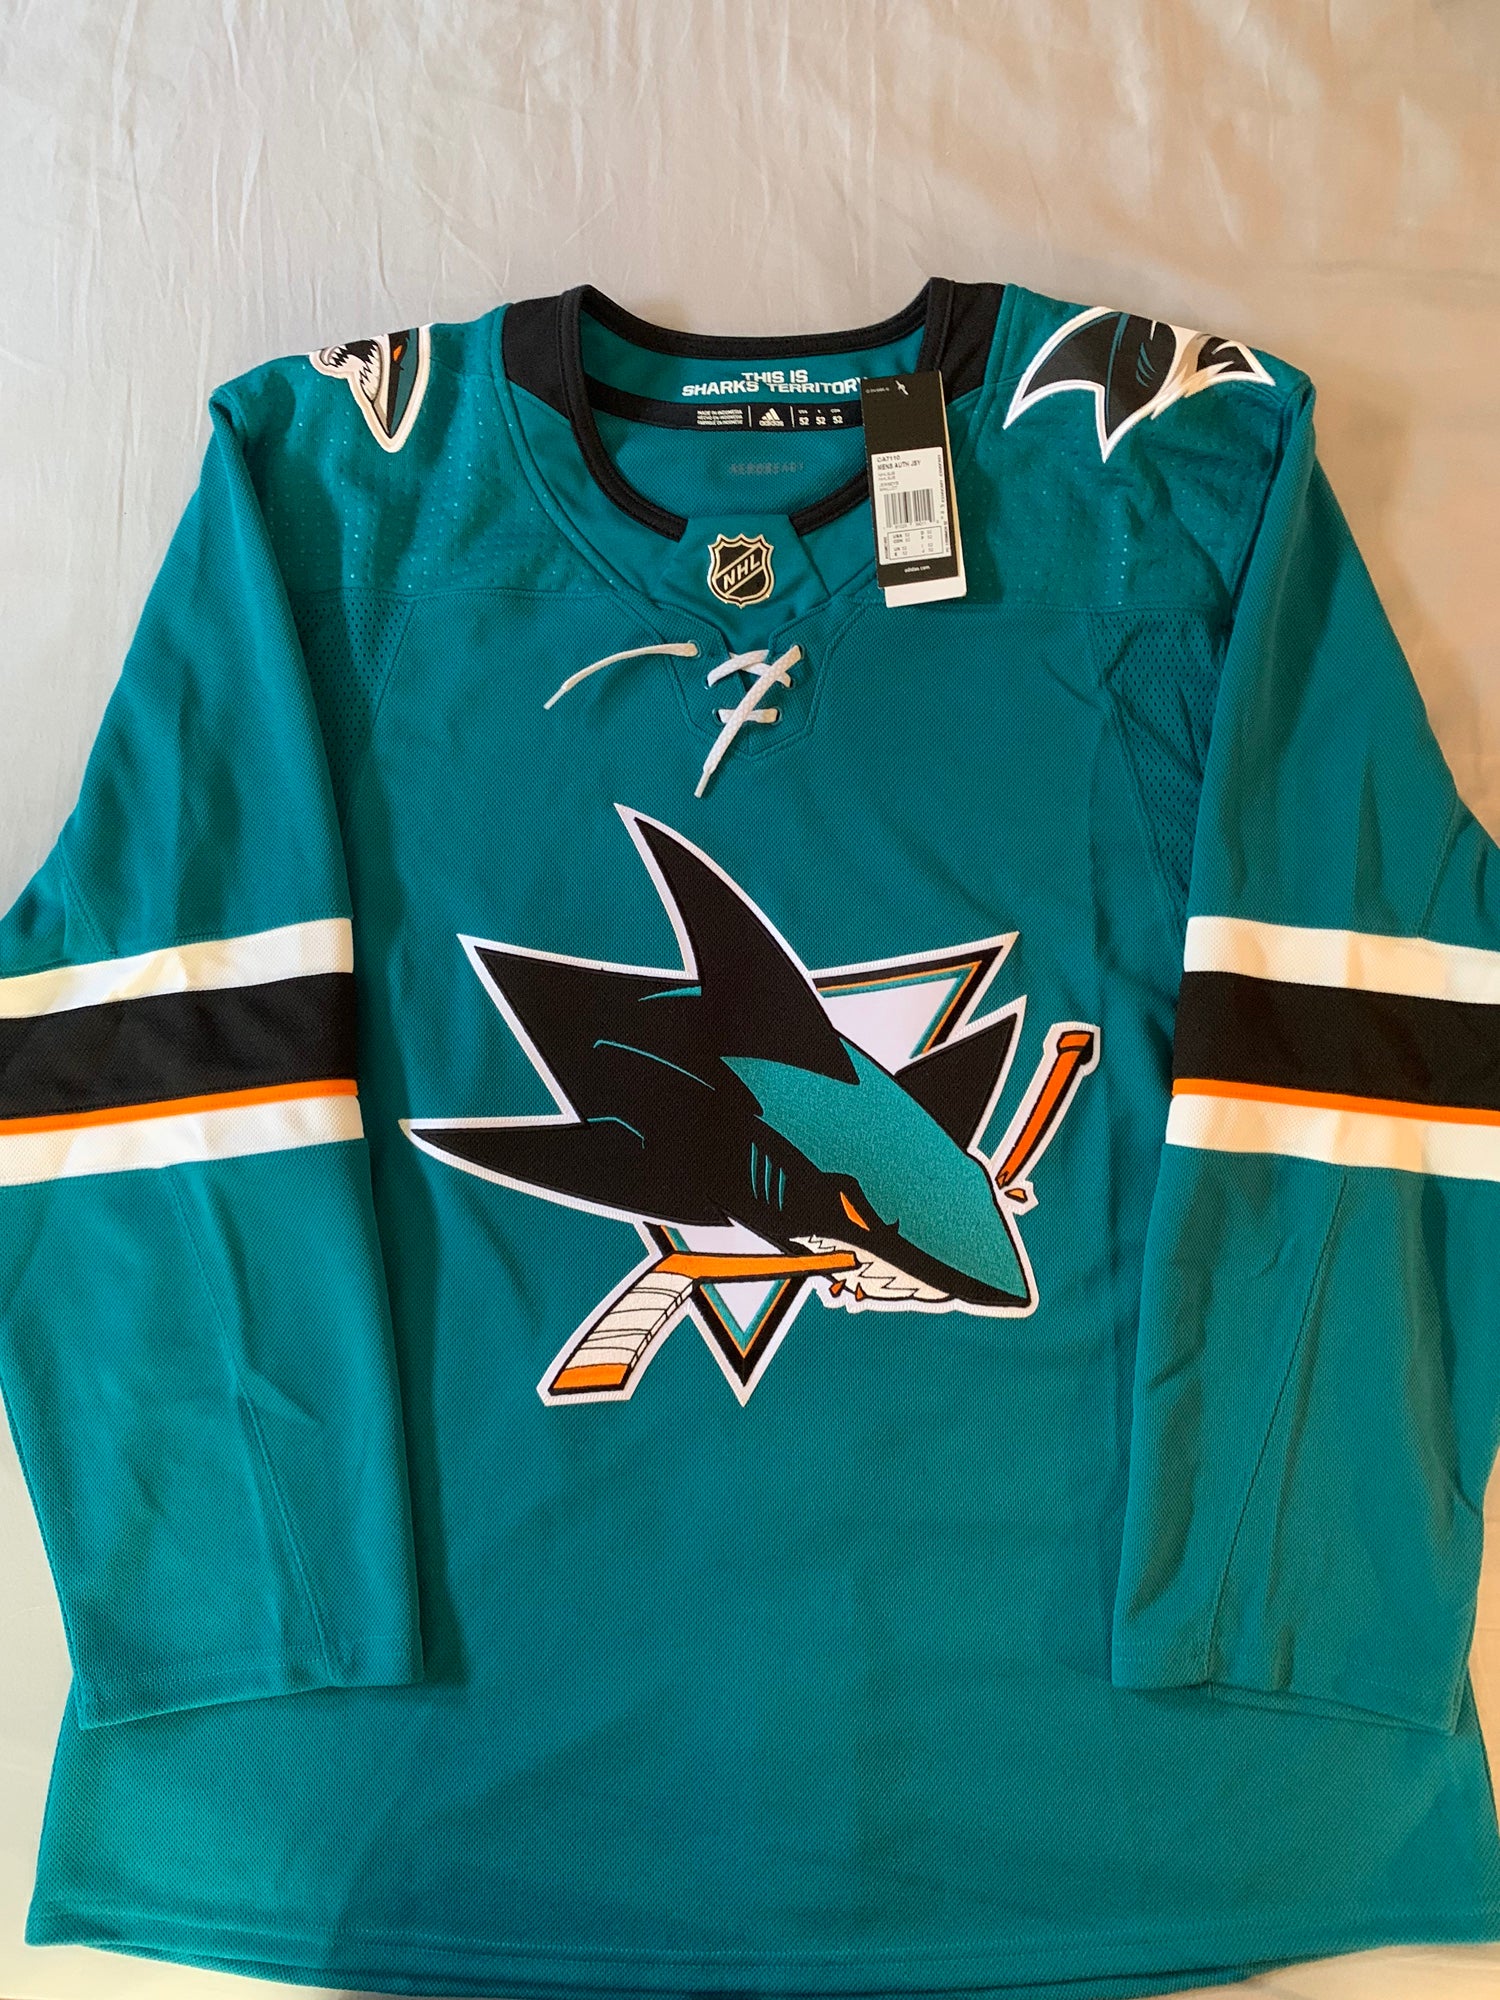 Sharks Bring Back Original Teal Jersey, How About White Throwbacks?